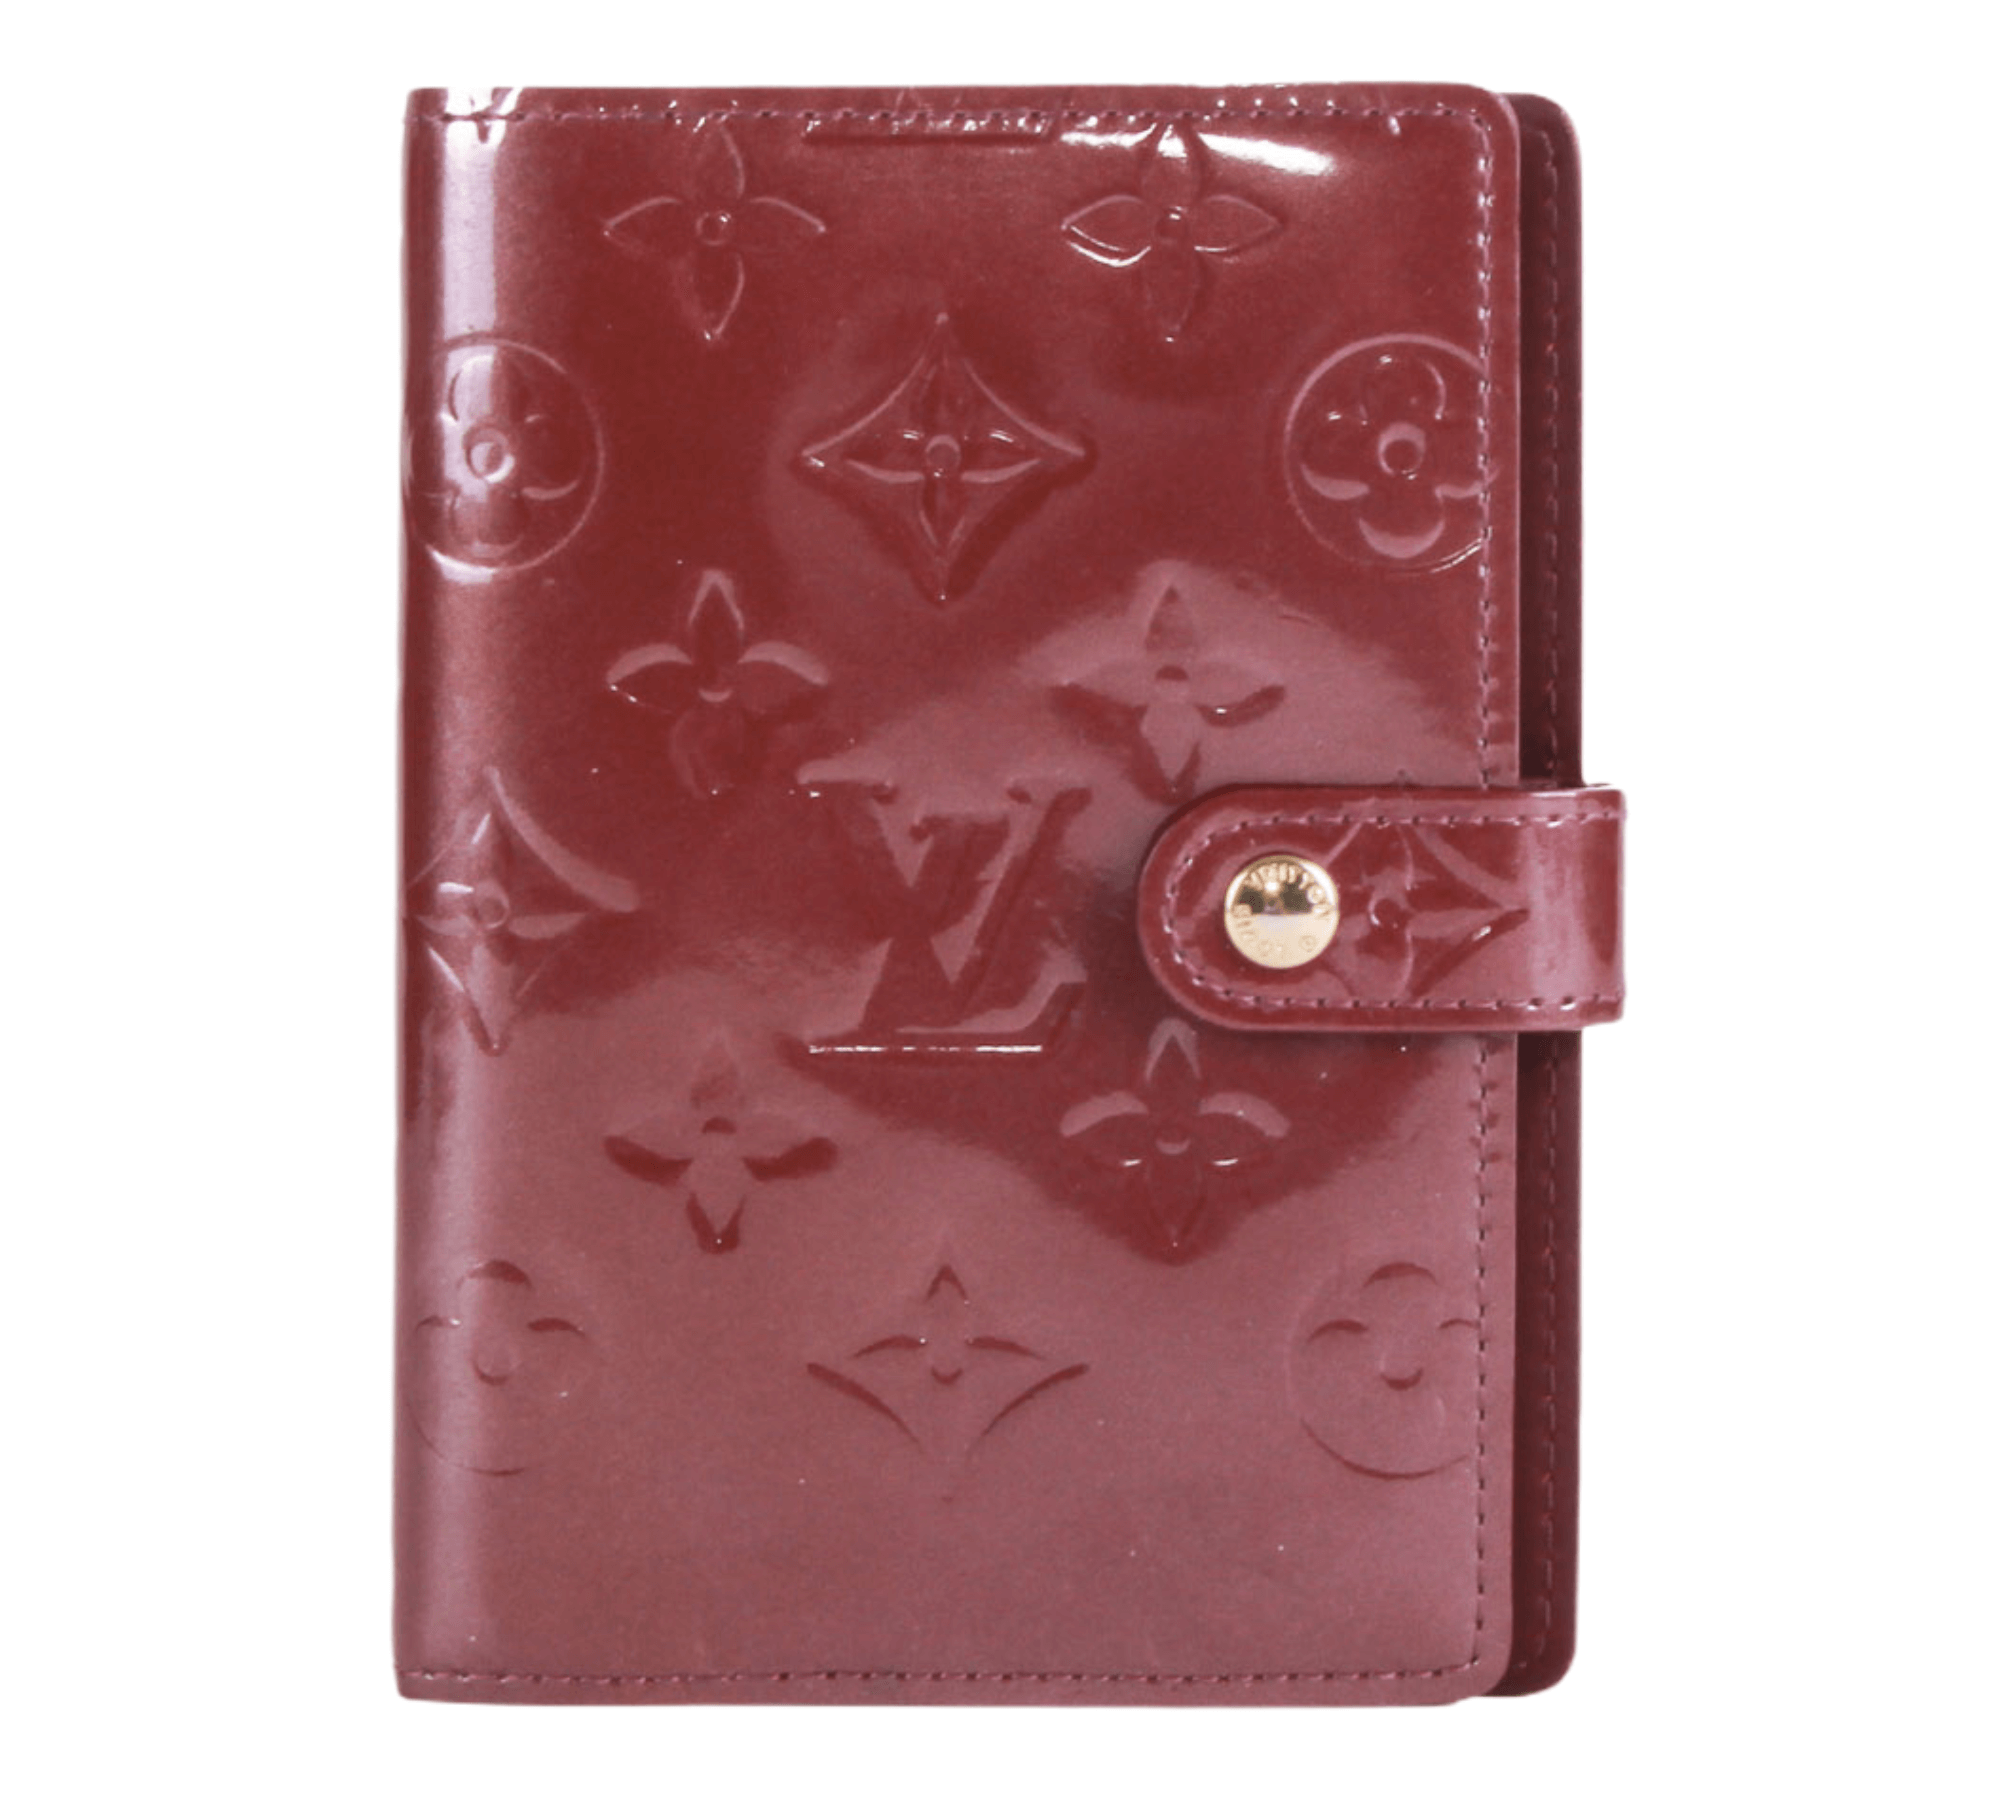 Authentic Pre-Owned Louis Vuitton Vernis Long Wallet in Plum